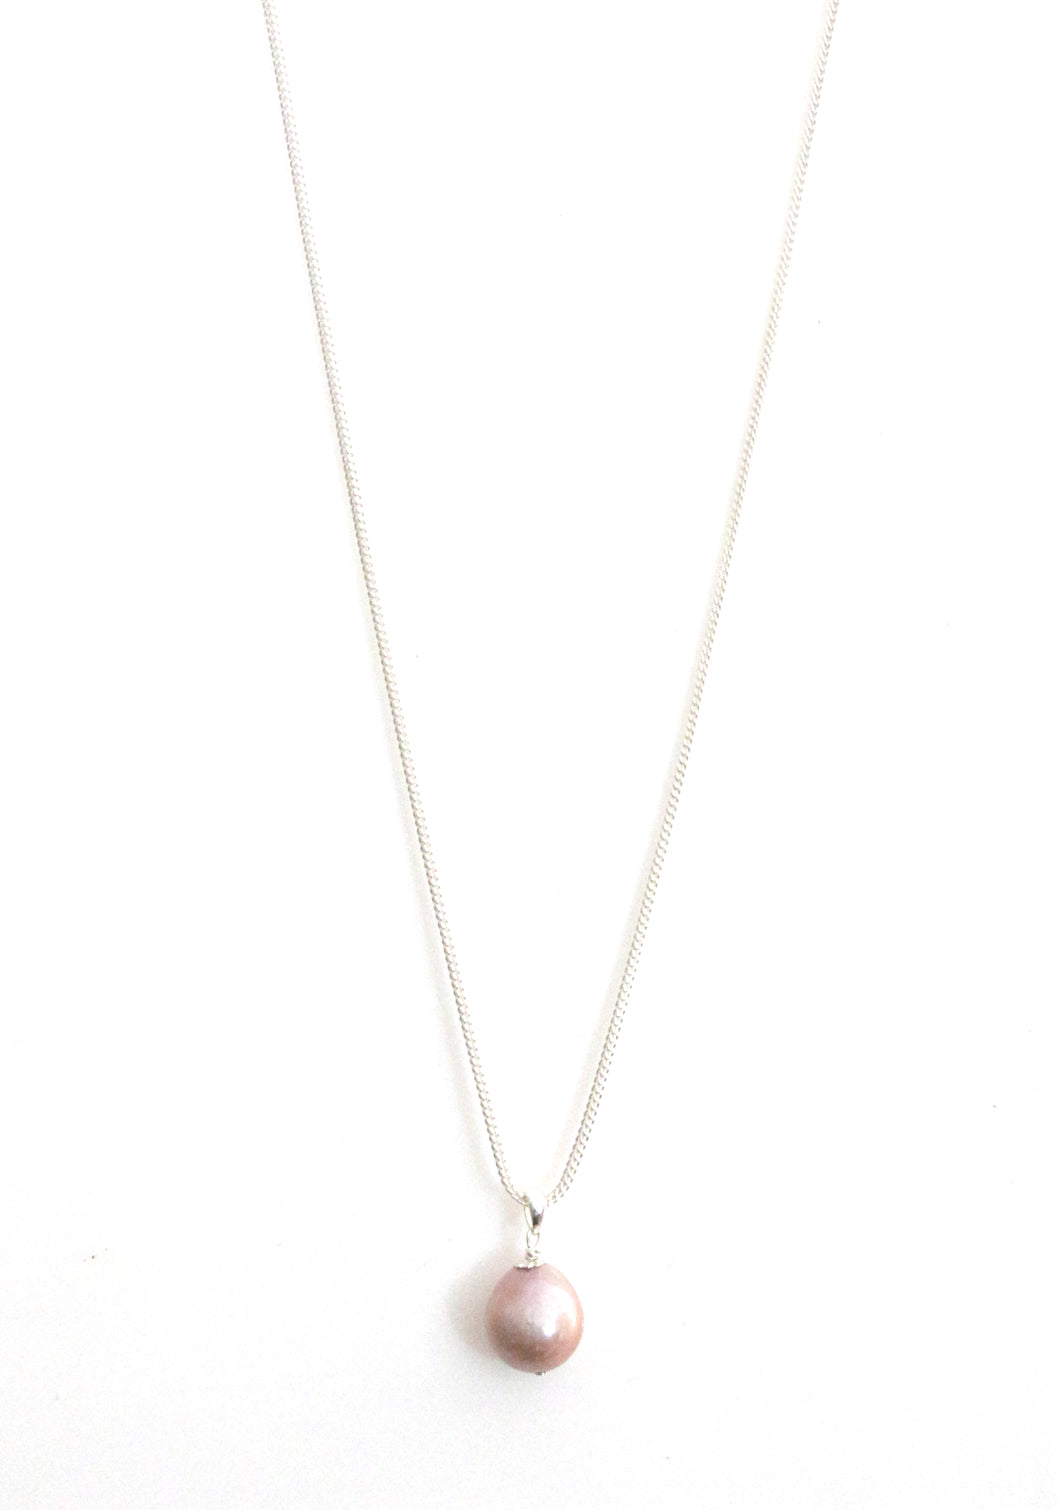 Australian Handmade Necklace with Natural Colour Pink Baroque Pearl and Sterling Silver Chain